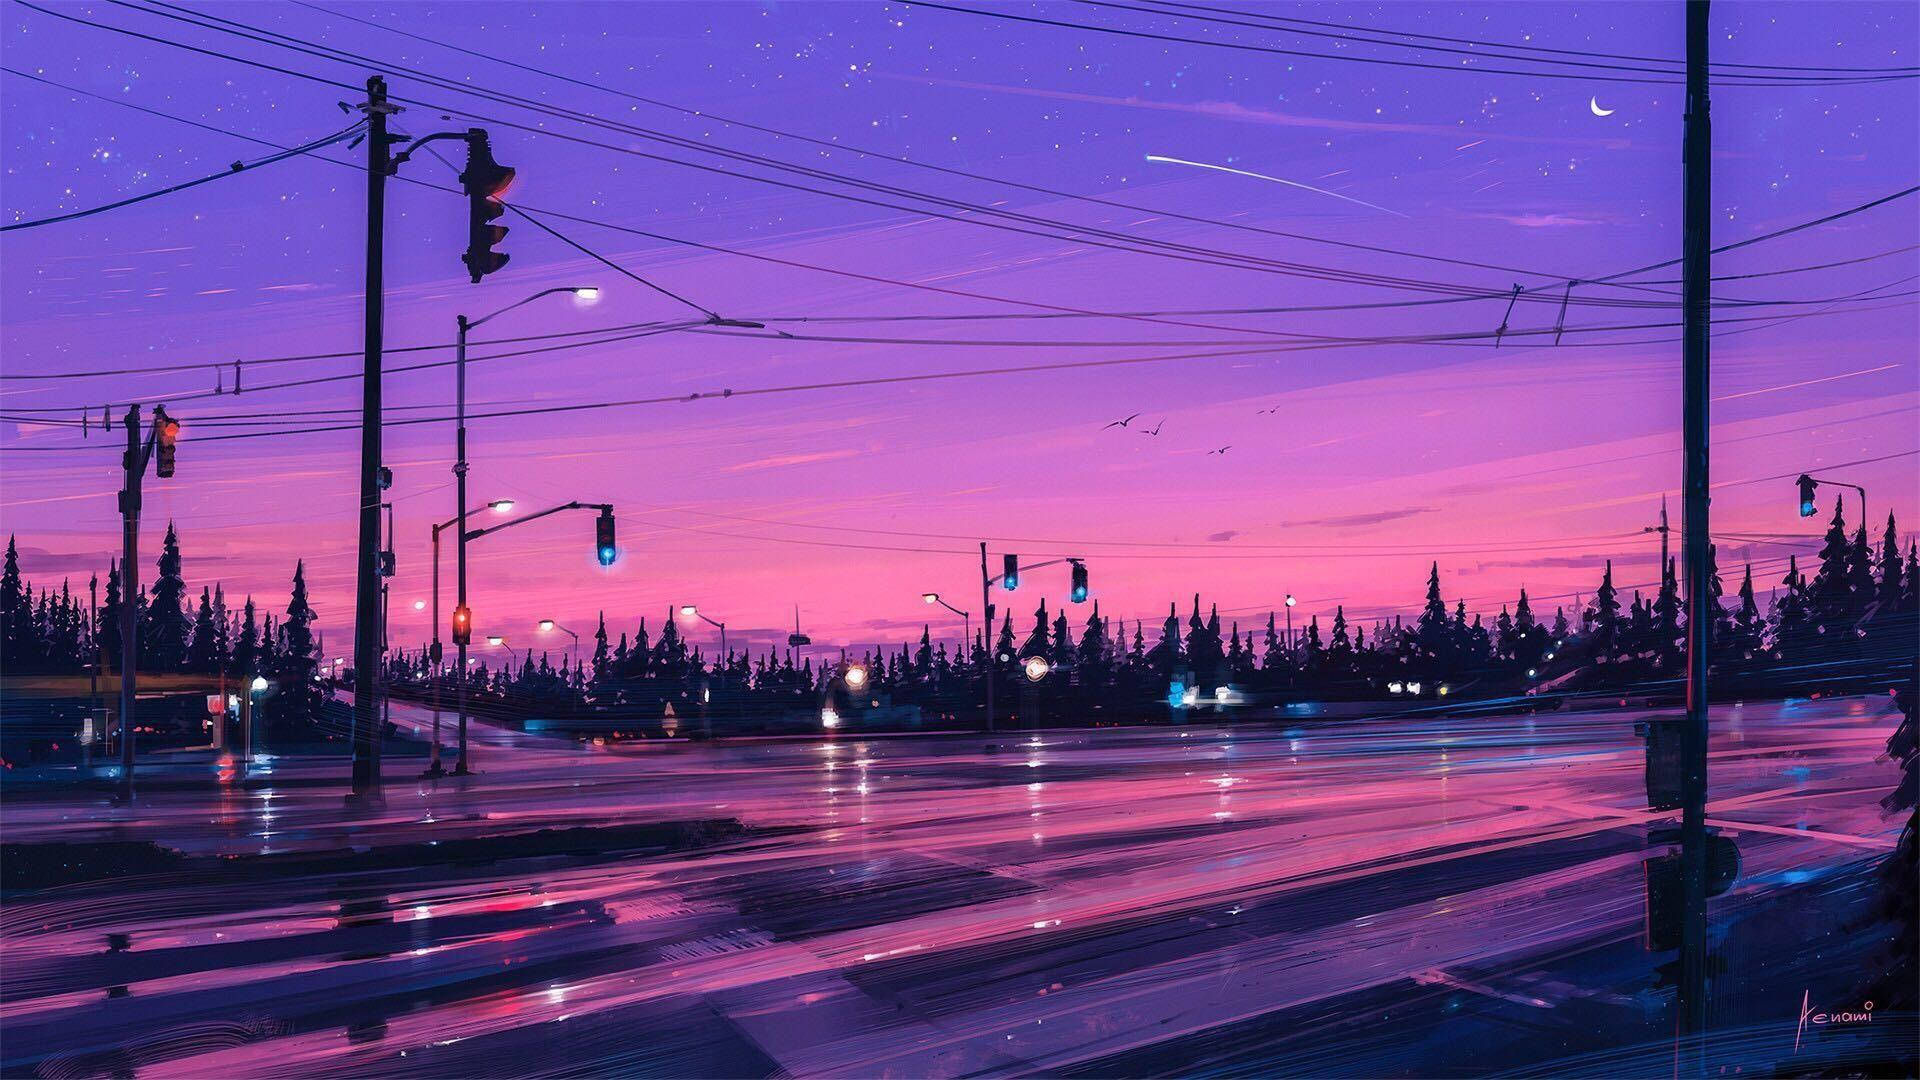 A Painting Of A City At Night With Lights And Wires Wallpaper